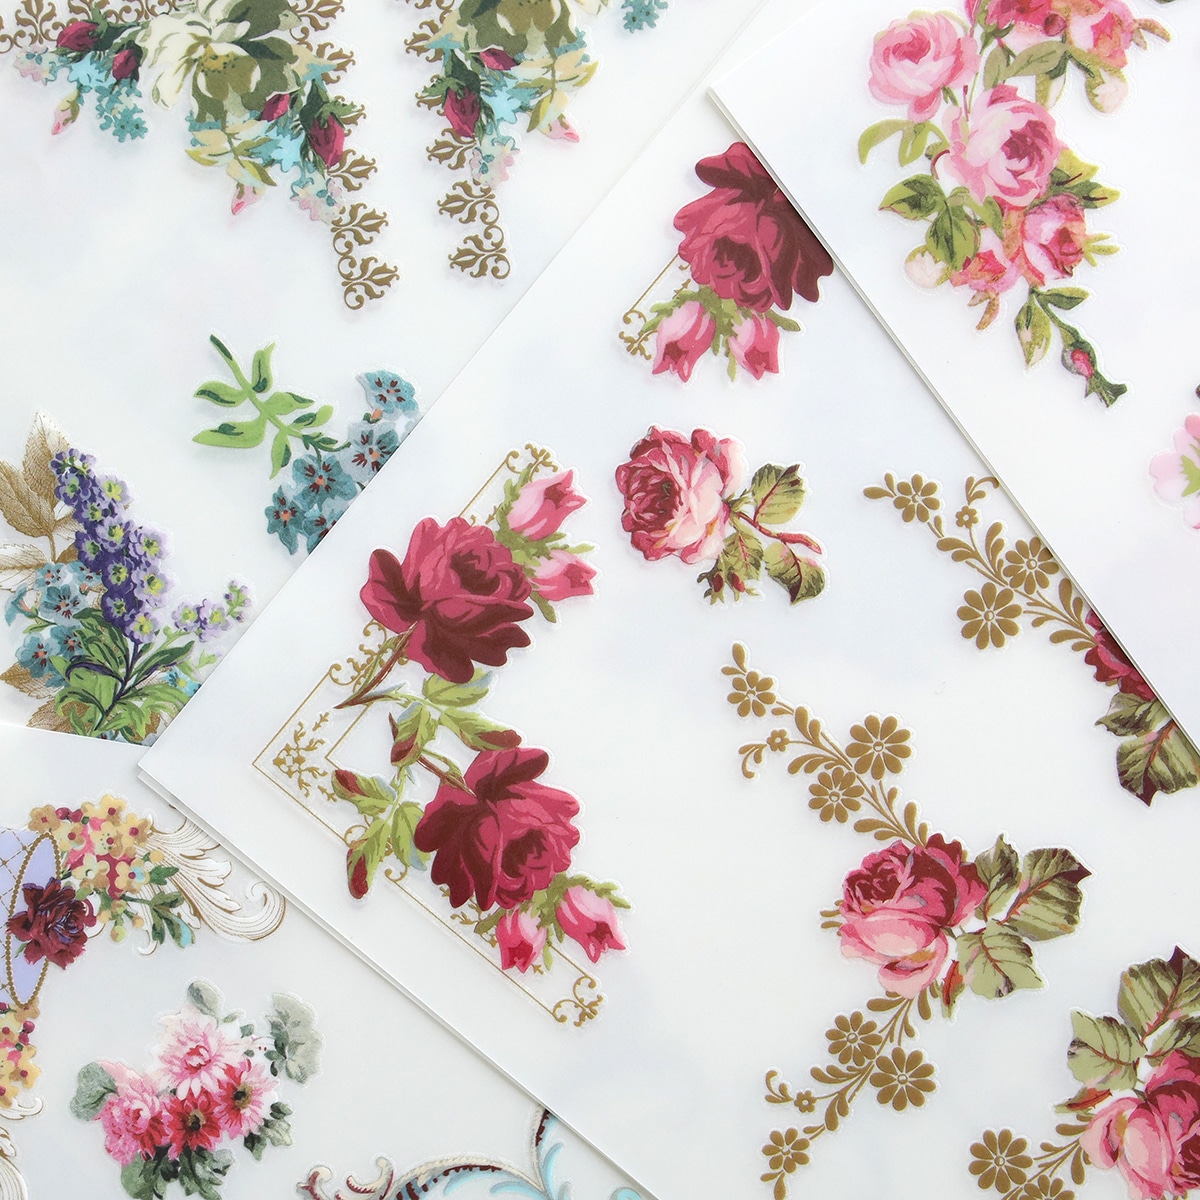 A variety of roses and floral designs are placed on a sheet of paper.